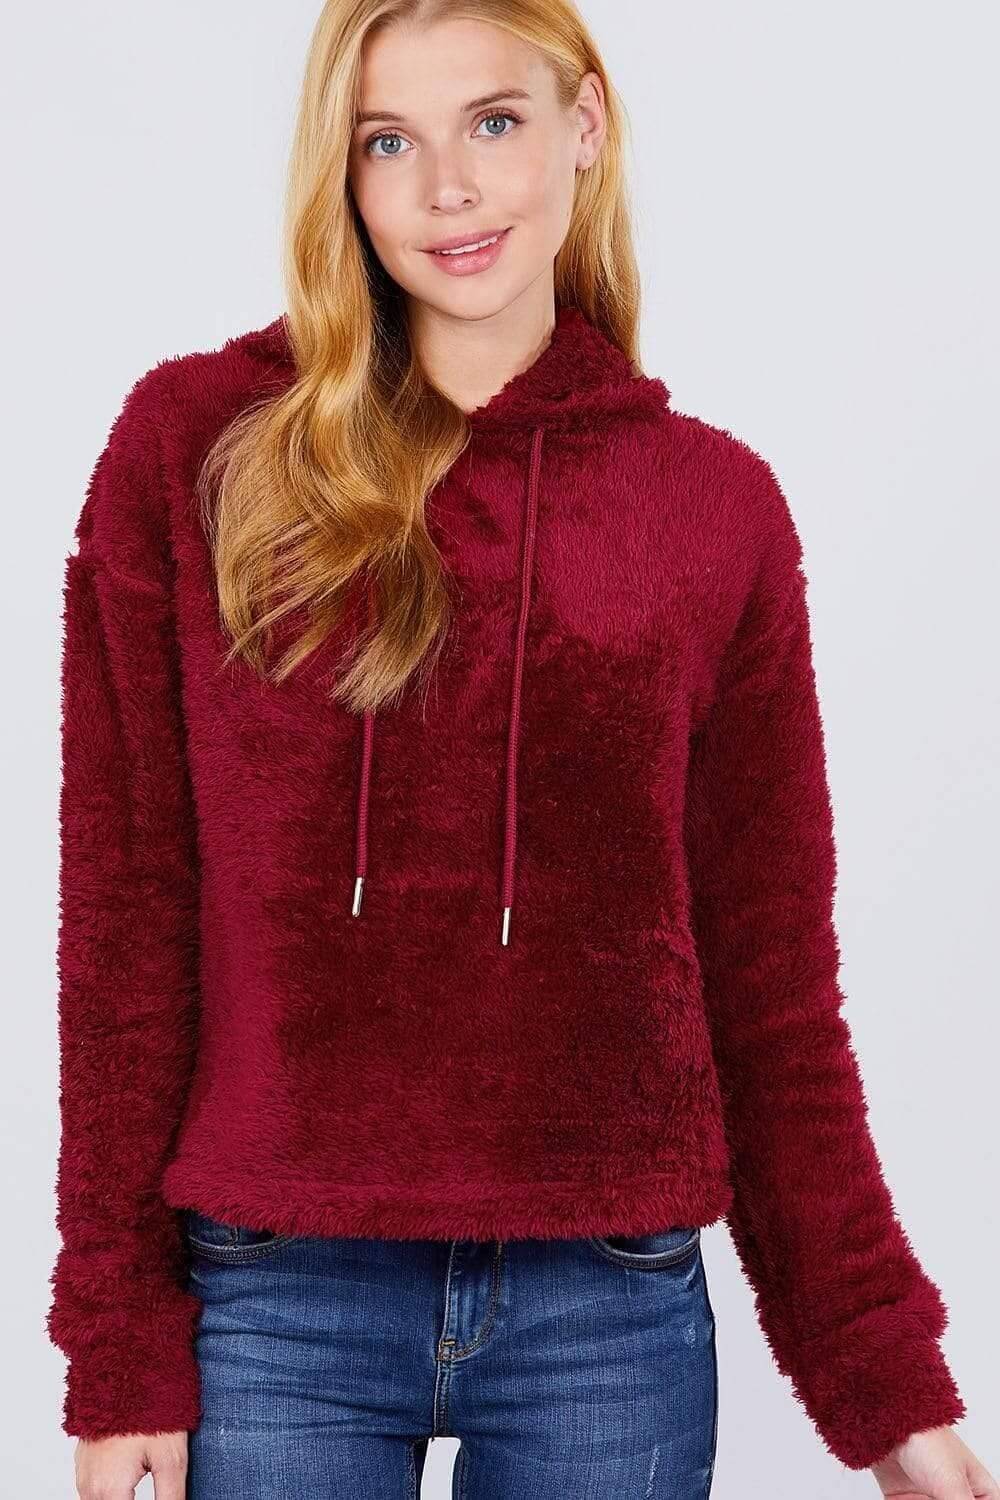 Burgundy Long Sleeve Faux Fur Sweater - Shopping Therapy S Sweater